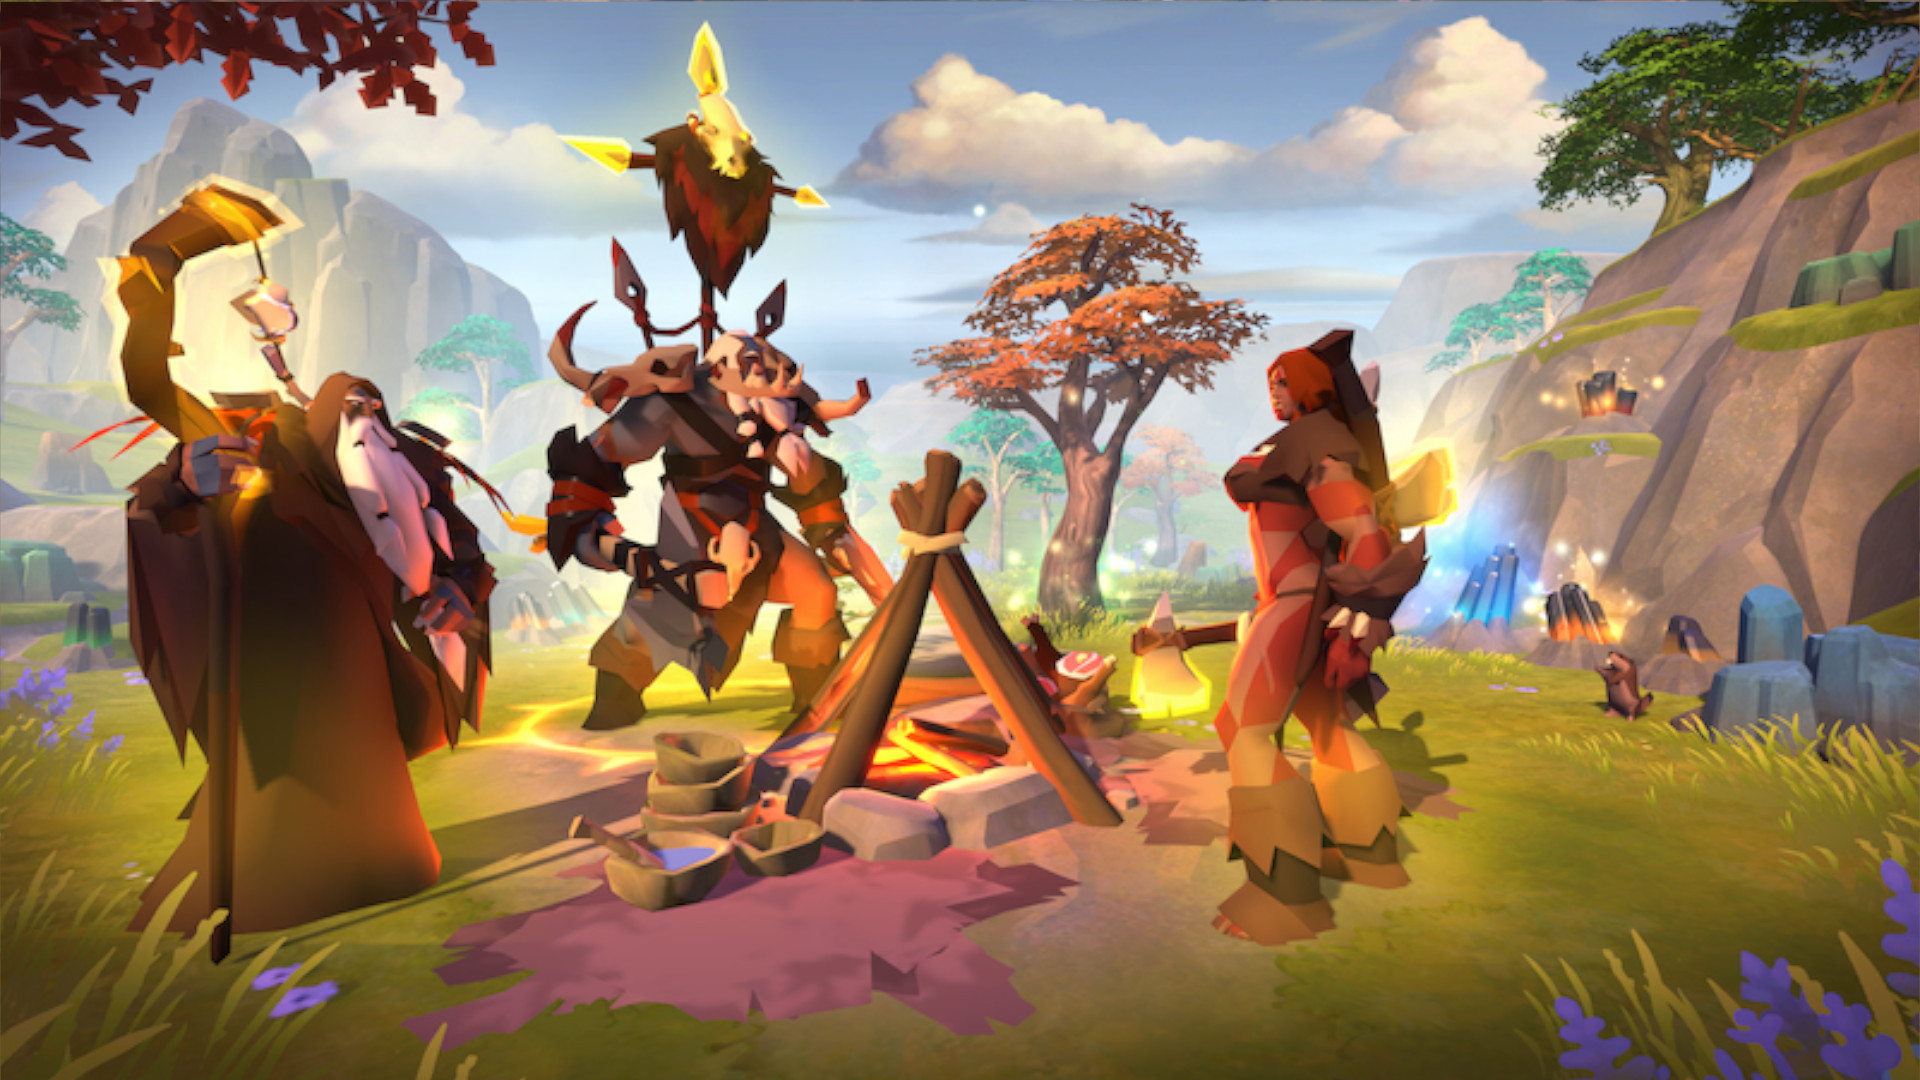 Albion Online “Paths to Glory” Characters around Campfire